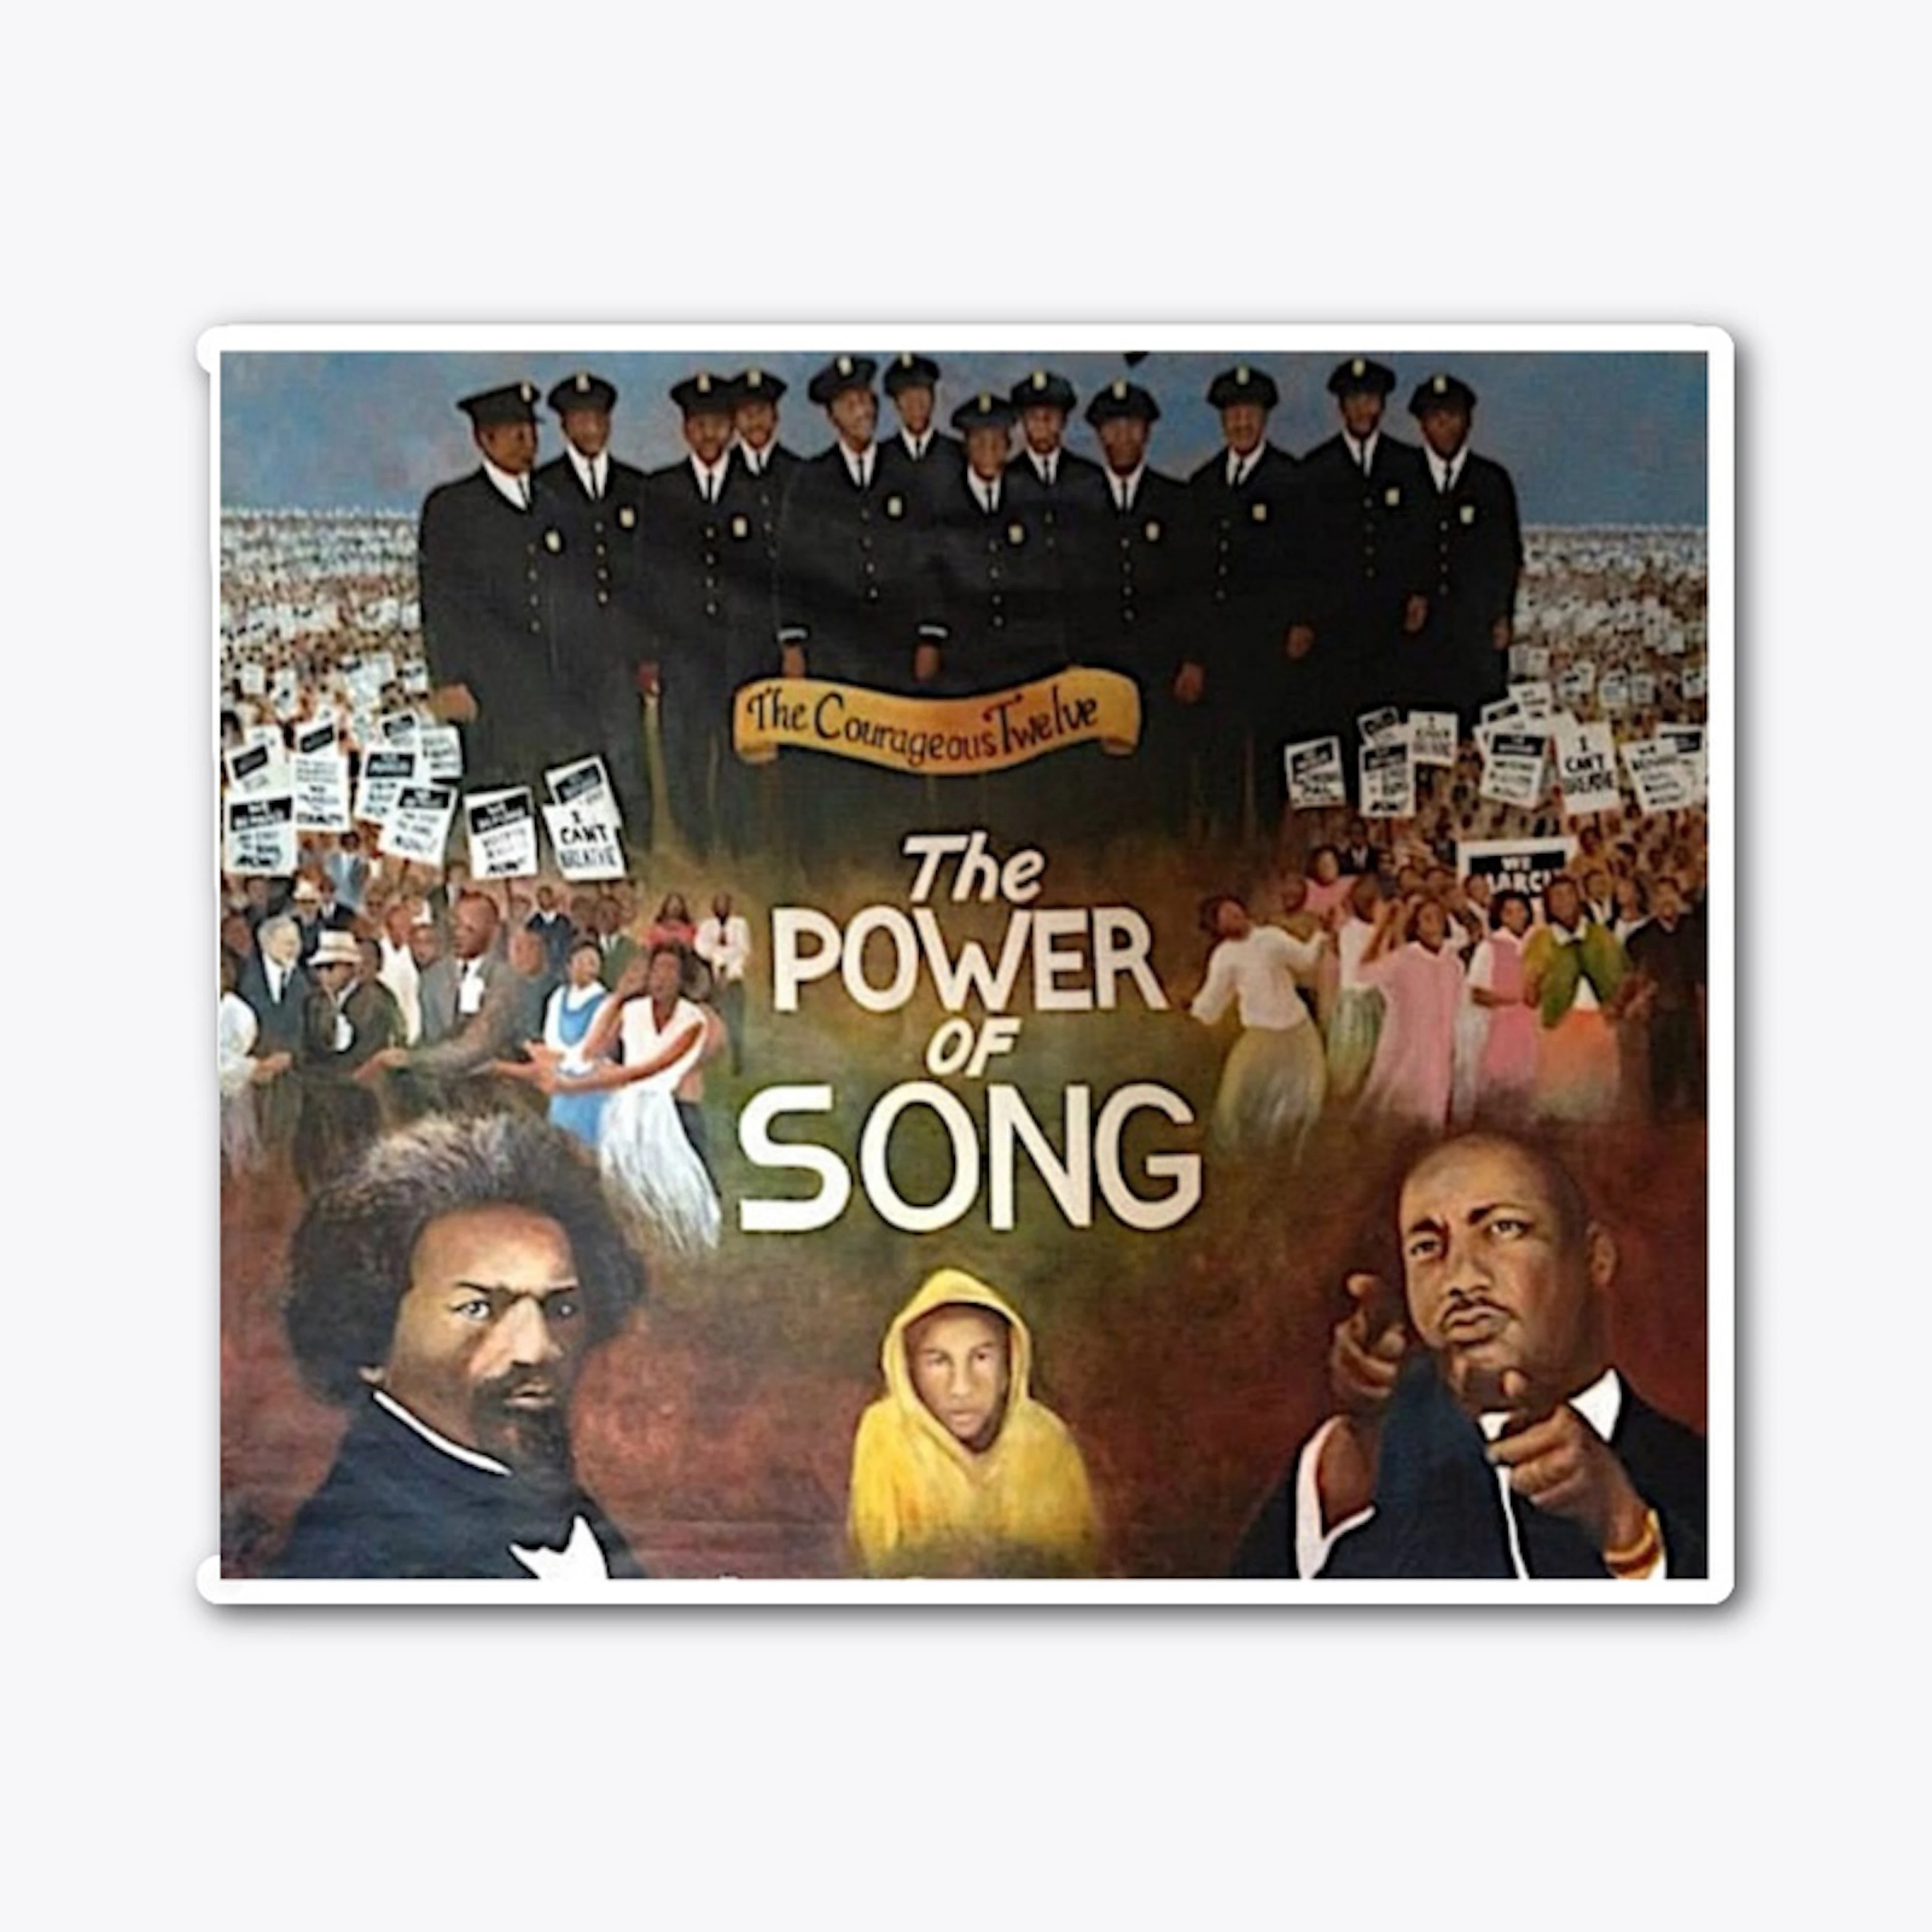 The Power of Song (version 2)